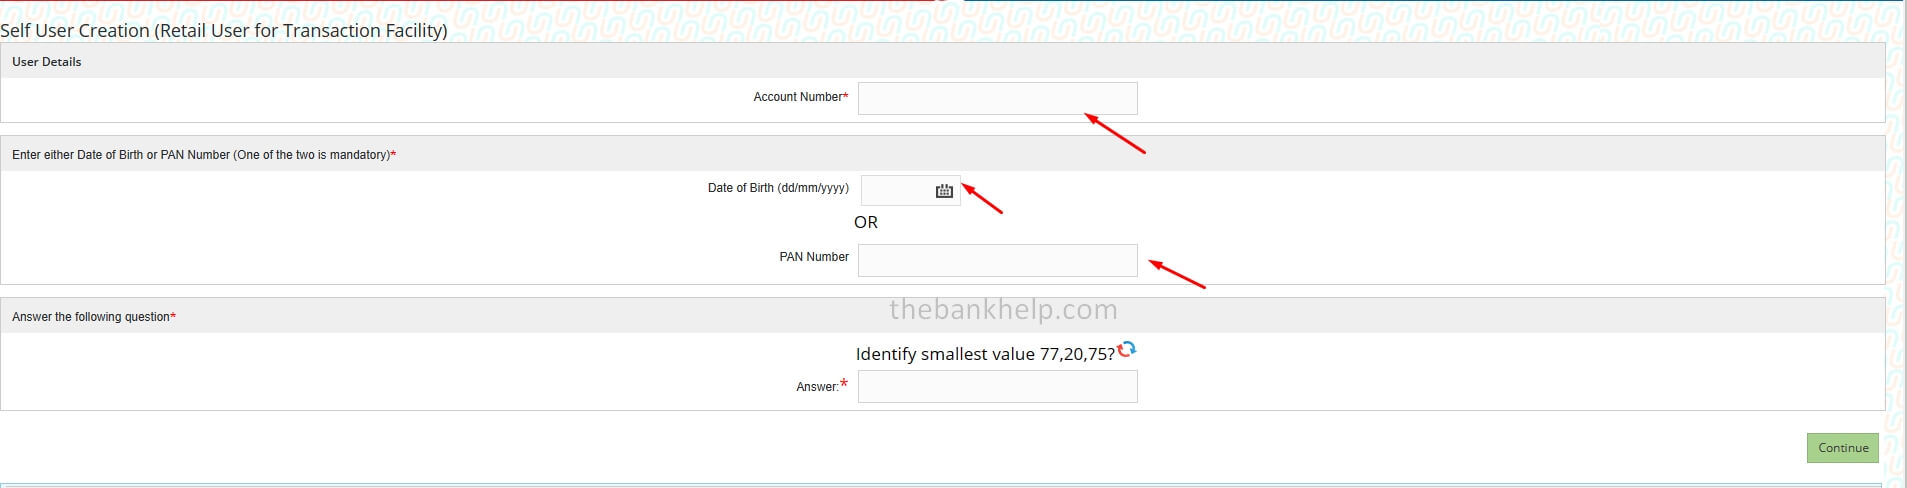 enter account number, pan and dob